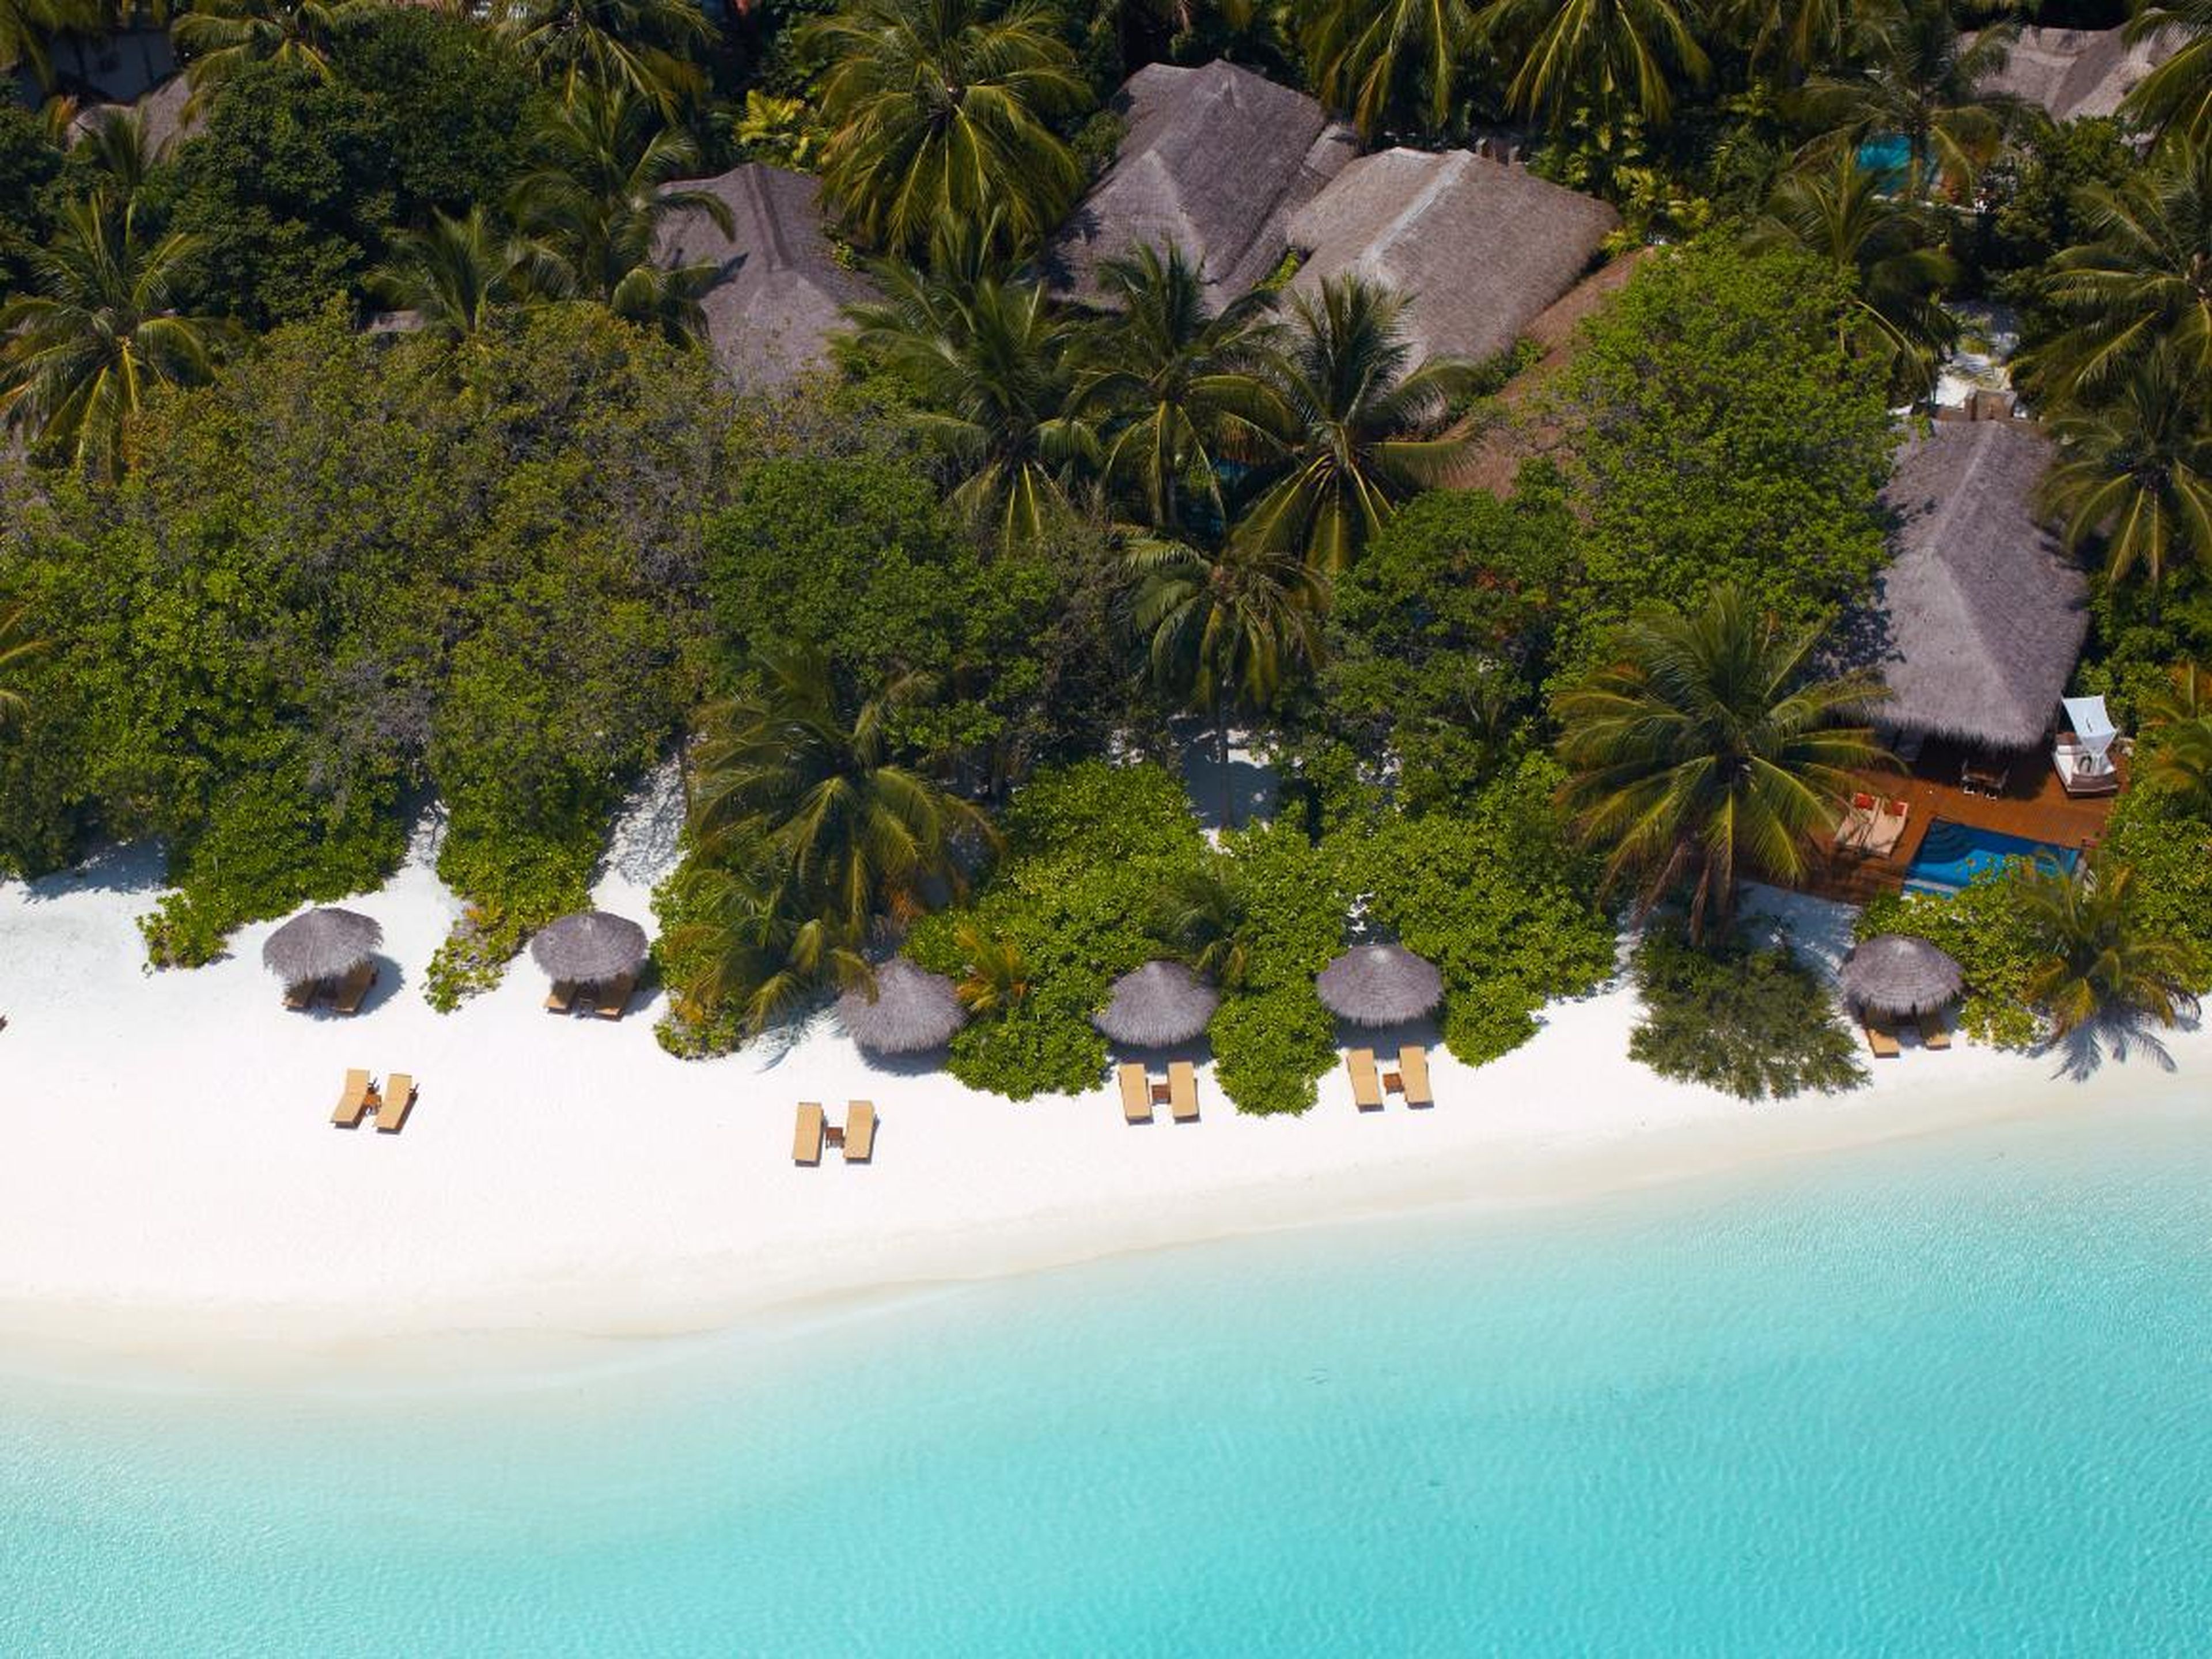 Baros Maldives, a luxury retreat on an island in the Indian Ocean, has won the "World's Most Romantic Resort" award for the seventh year in a row.